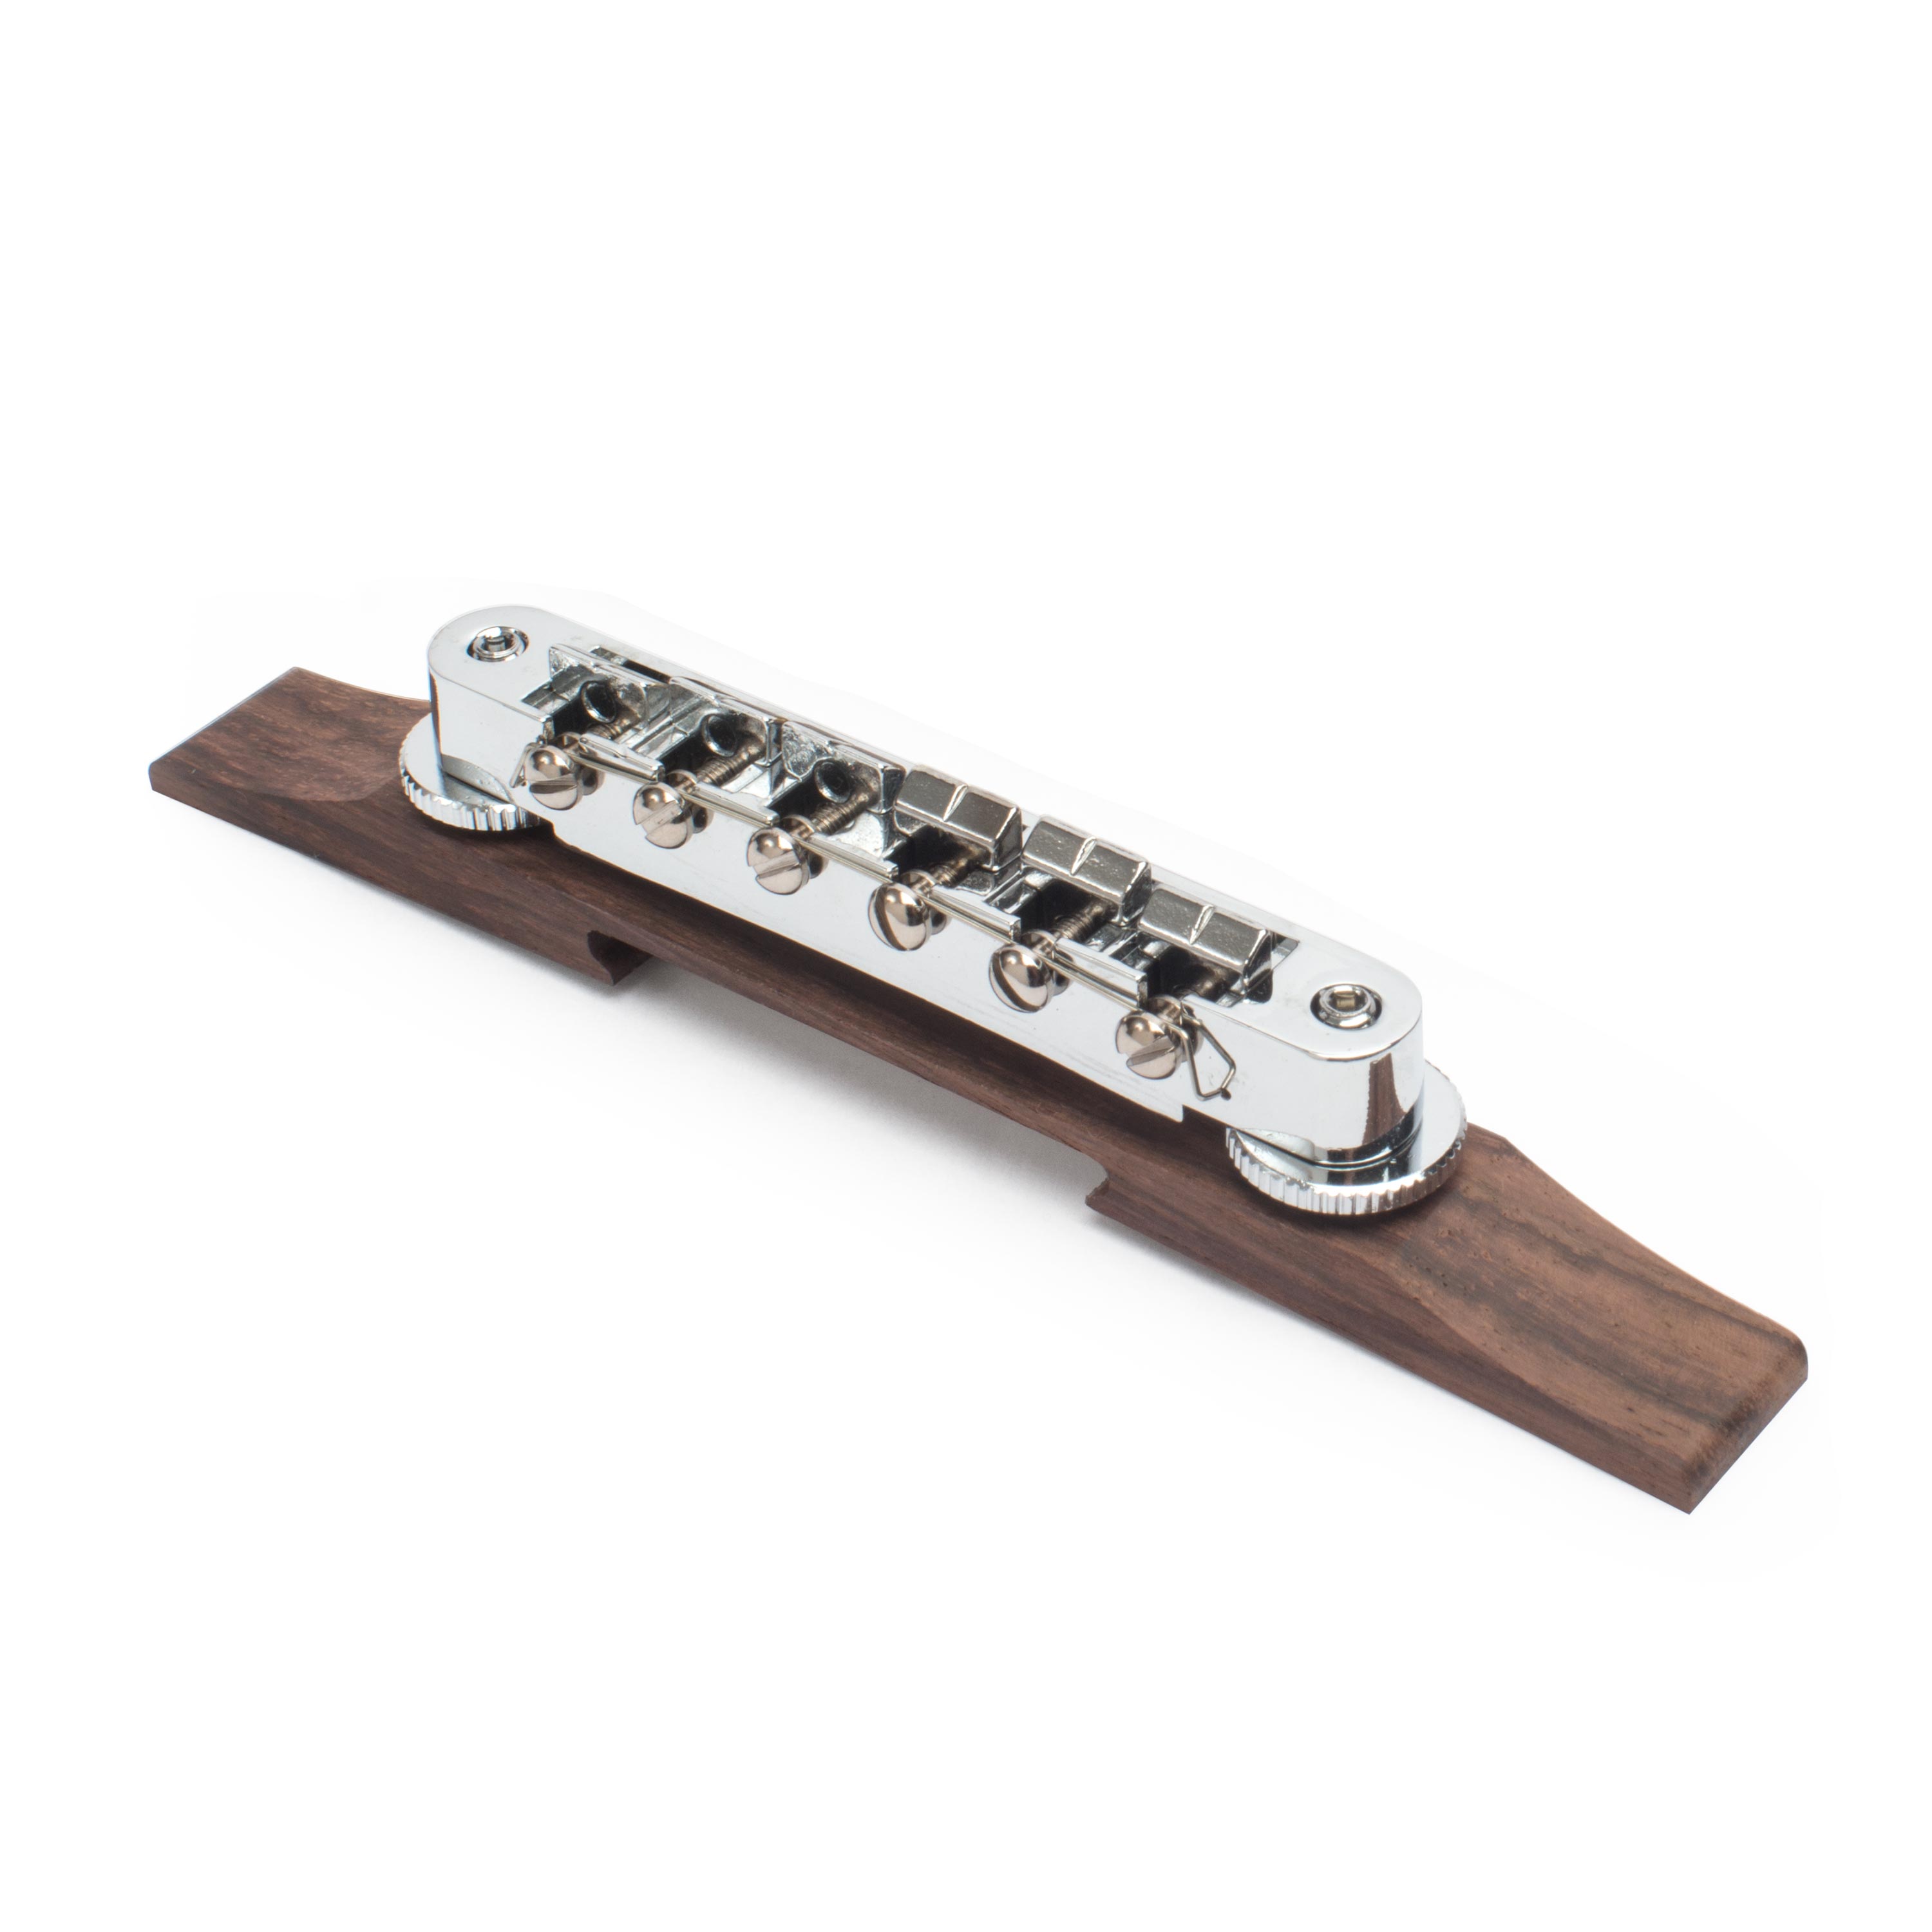 Tune-o-matic Bridge For Archtop Guitar